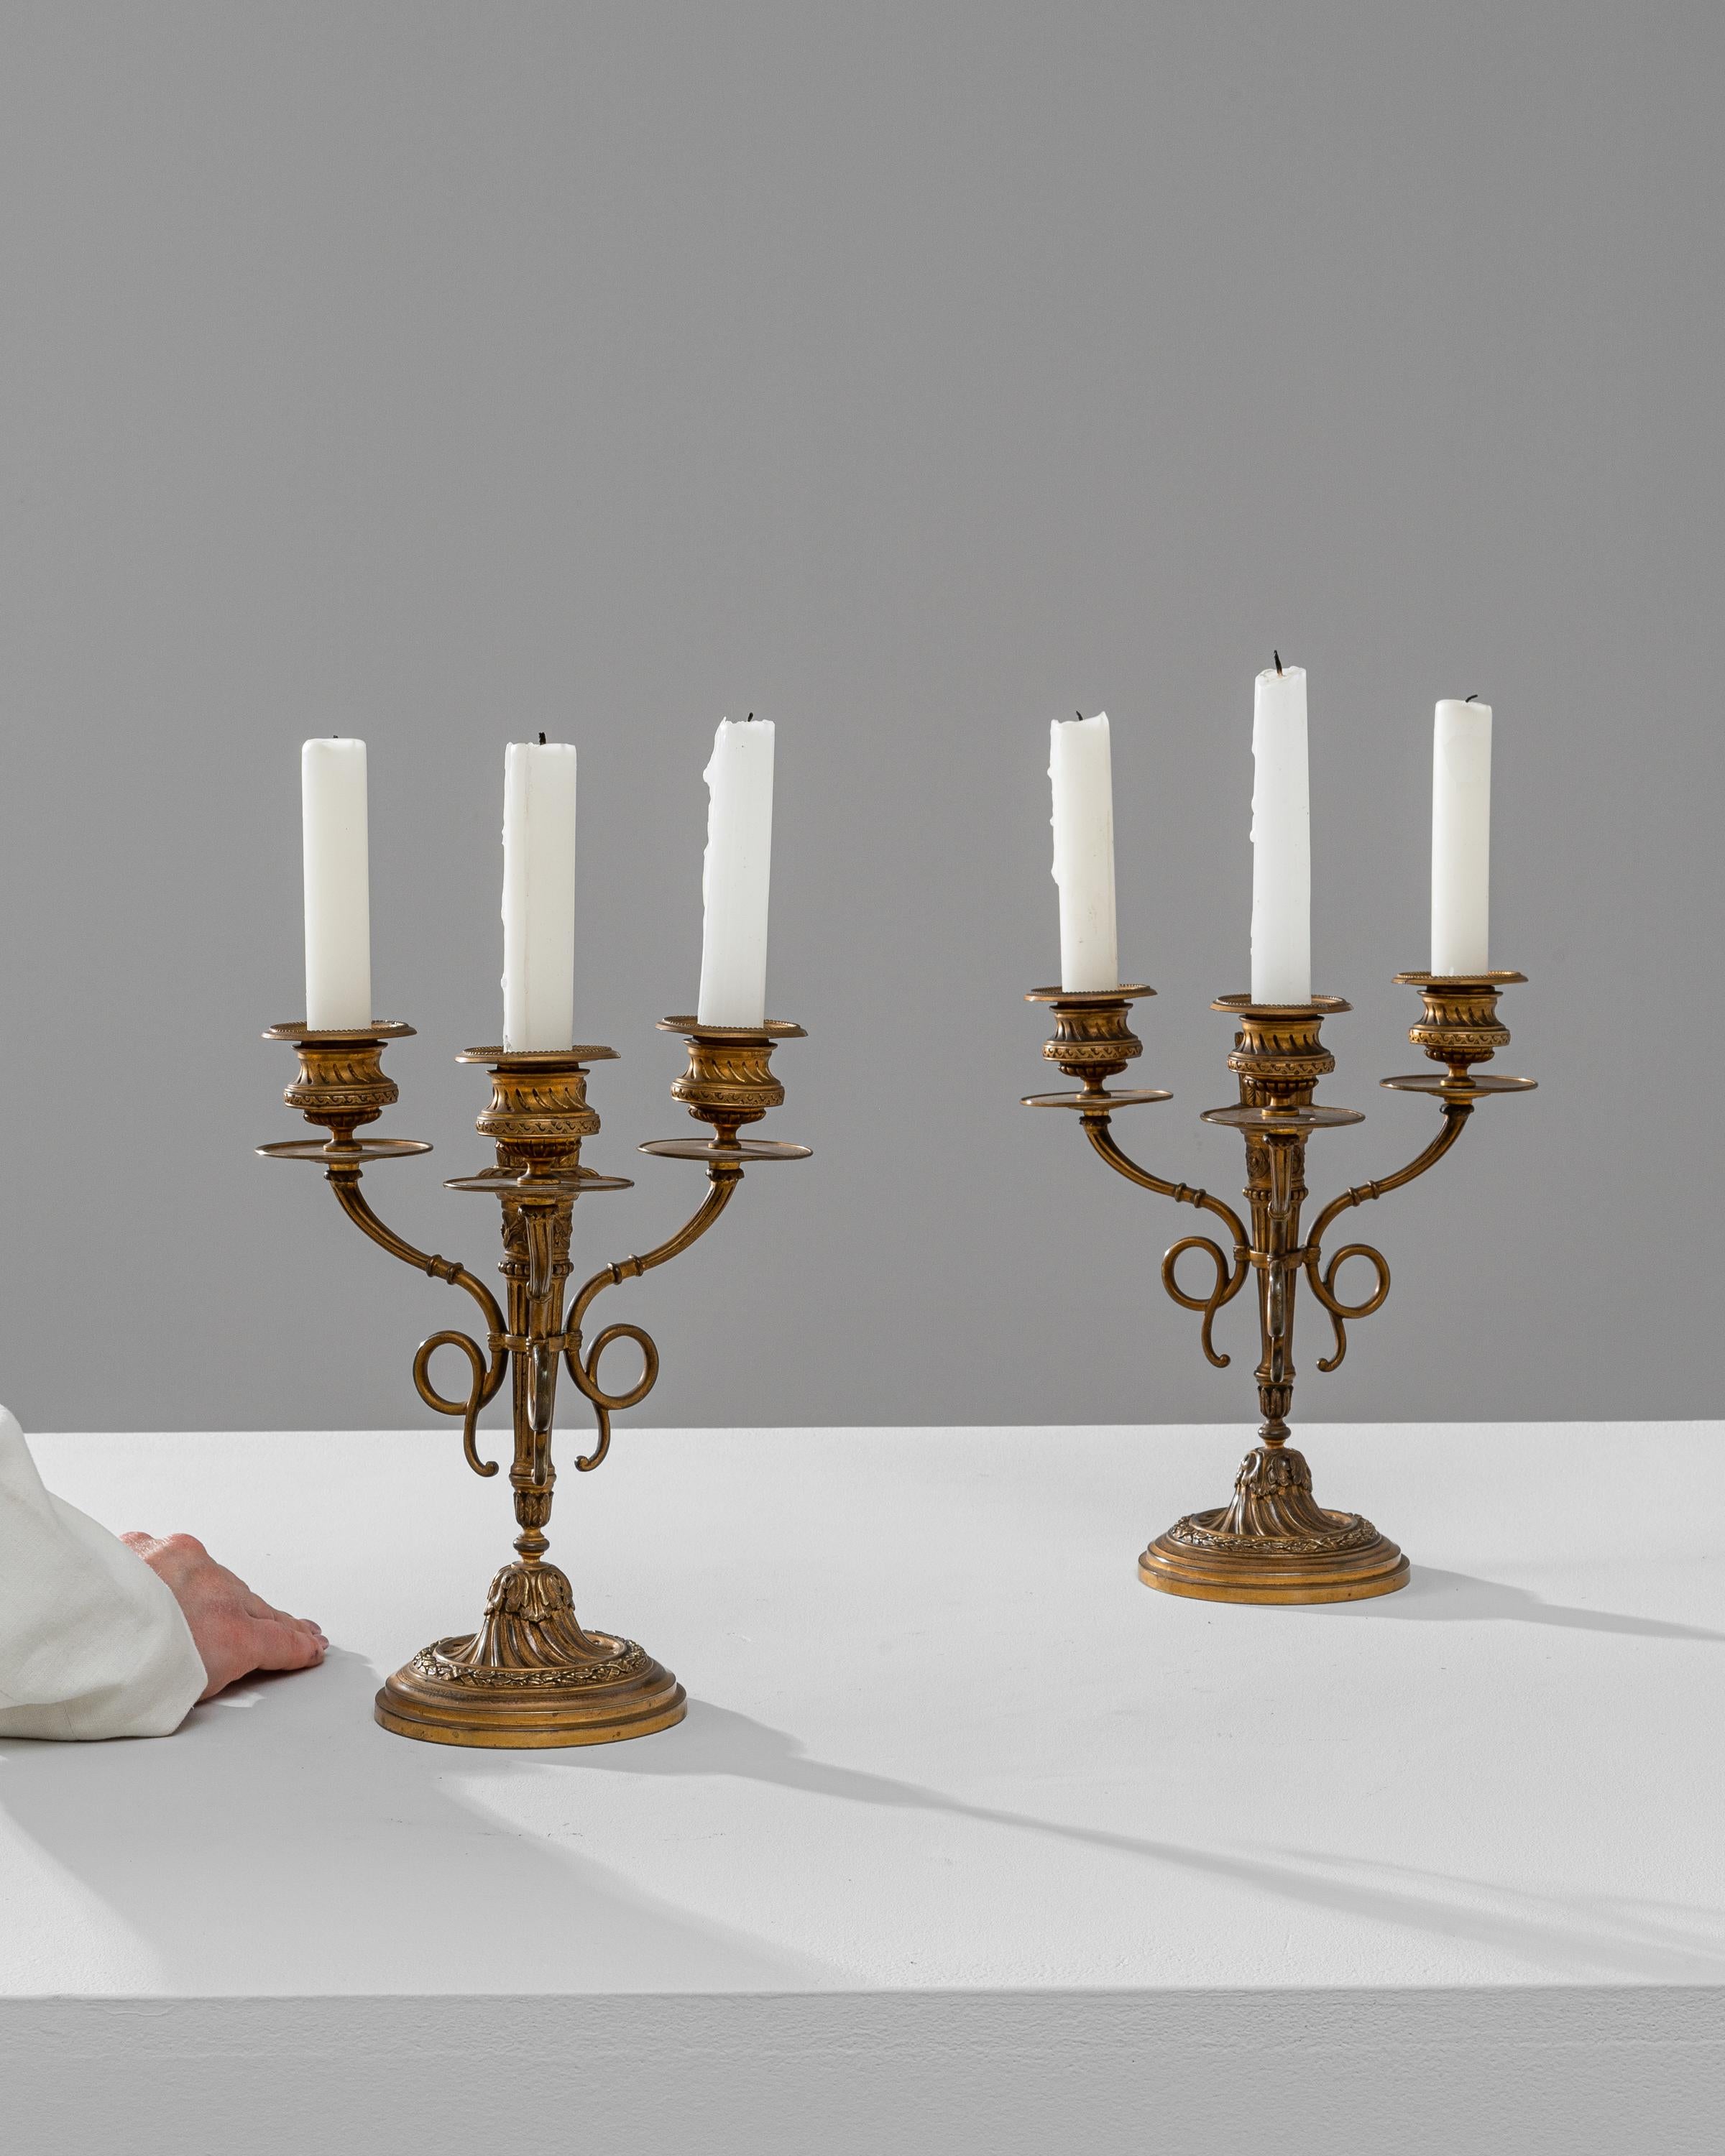 This exquisite pair of 19th Century French Brass Candle Holders is a testament to the opulent design and craftsmanship of the period. Featuring a candelabra design, each holder is meticulously crafted from fine brass, showcasing an ornate base with